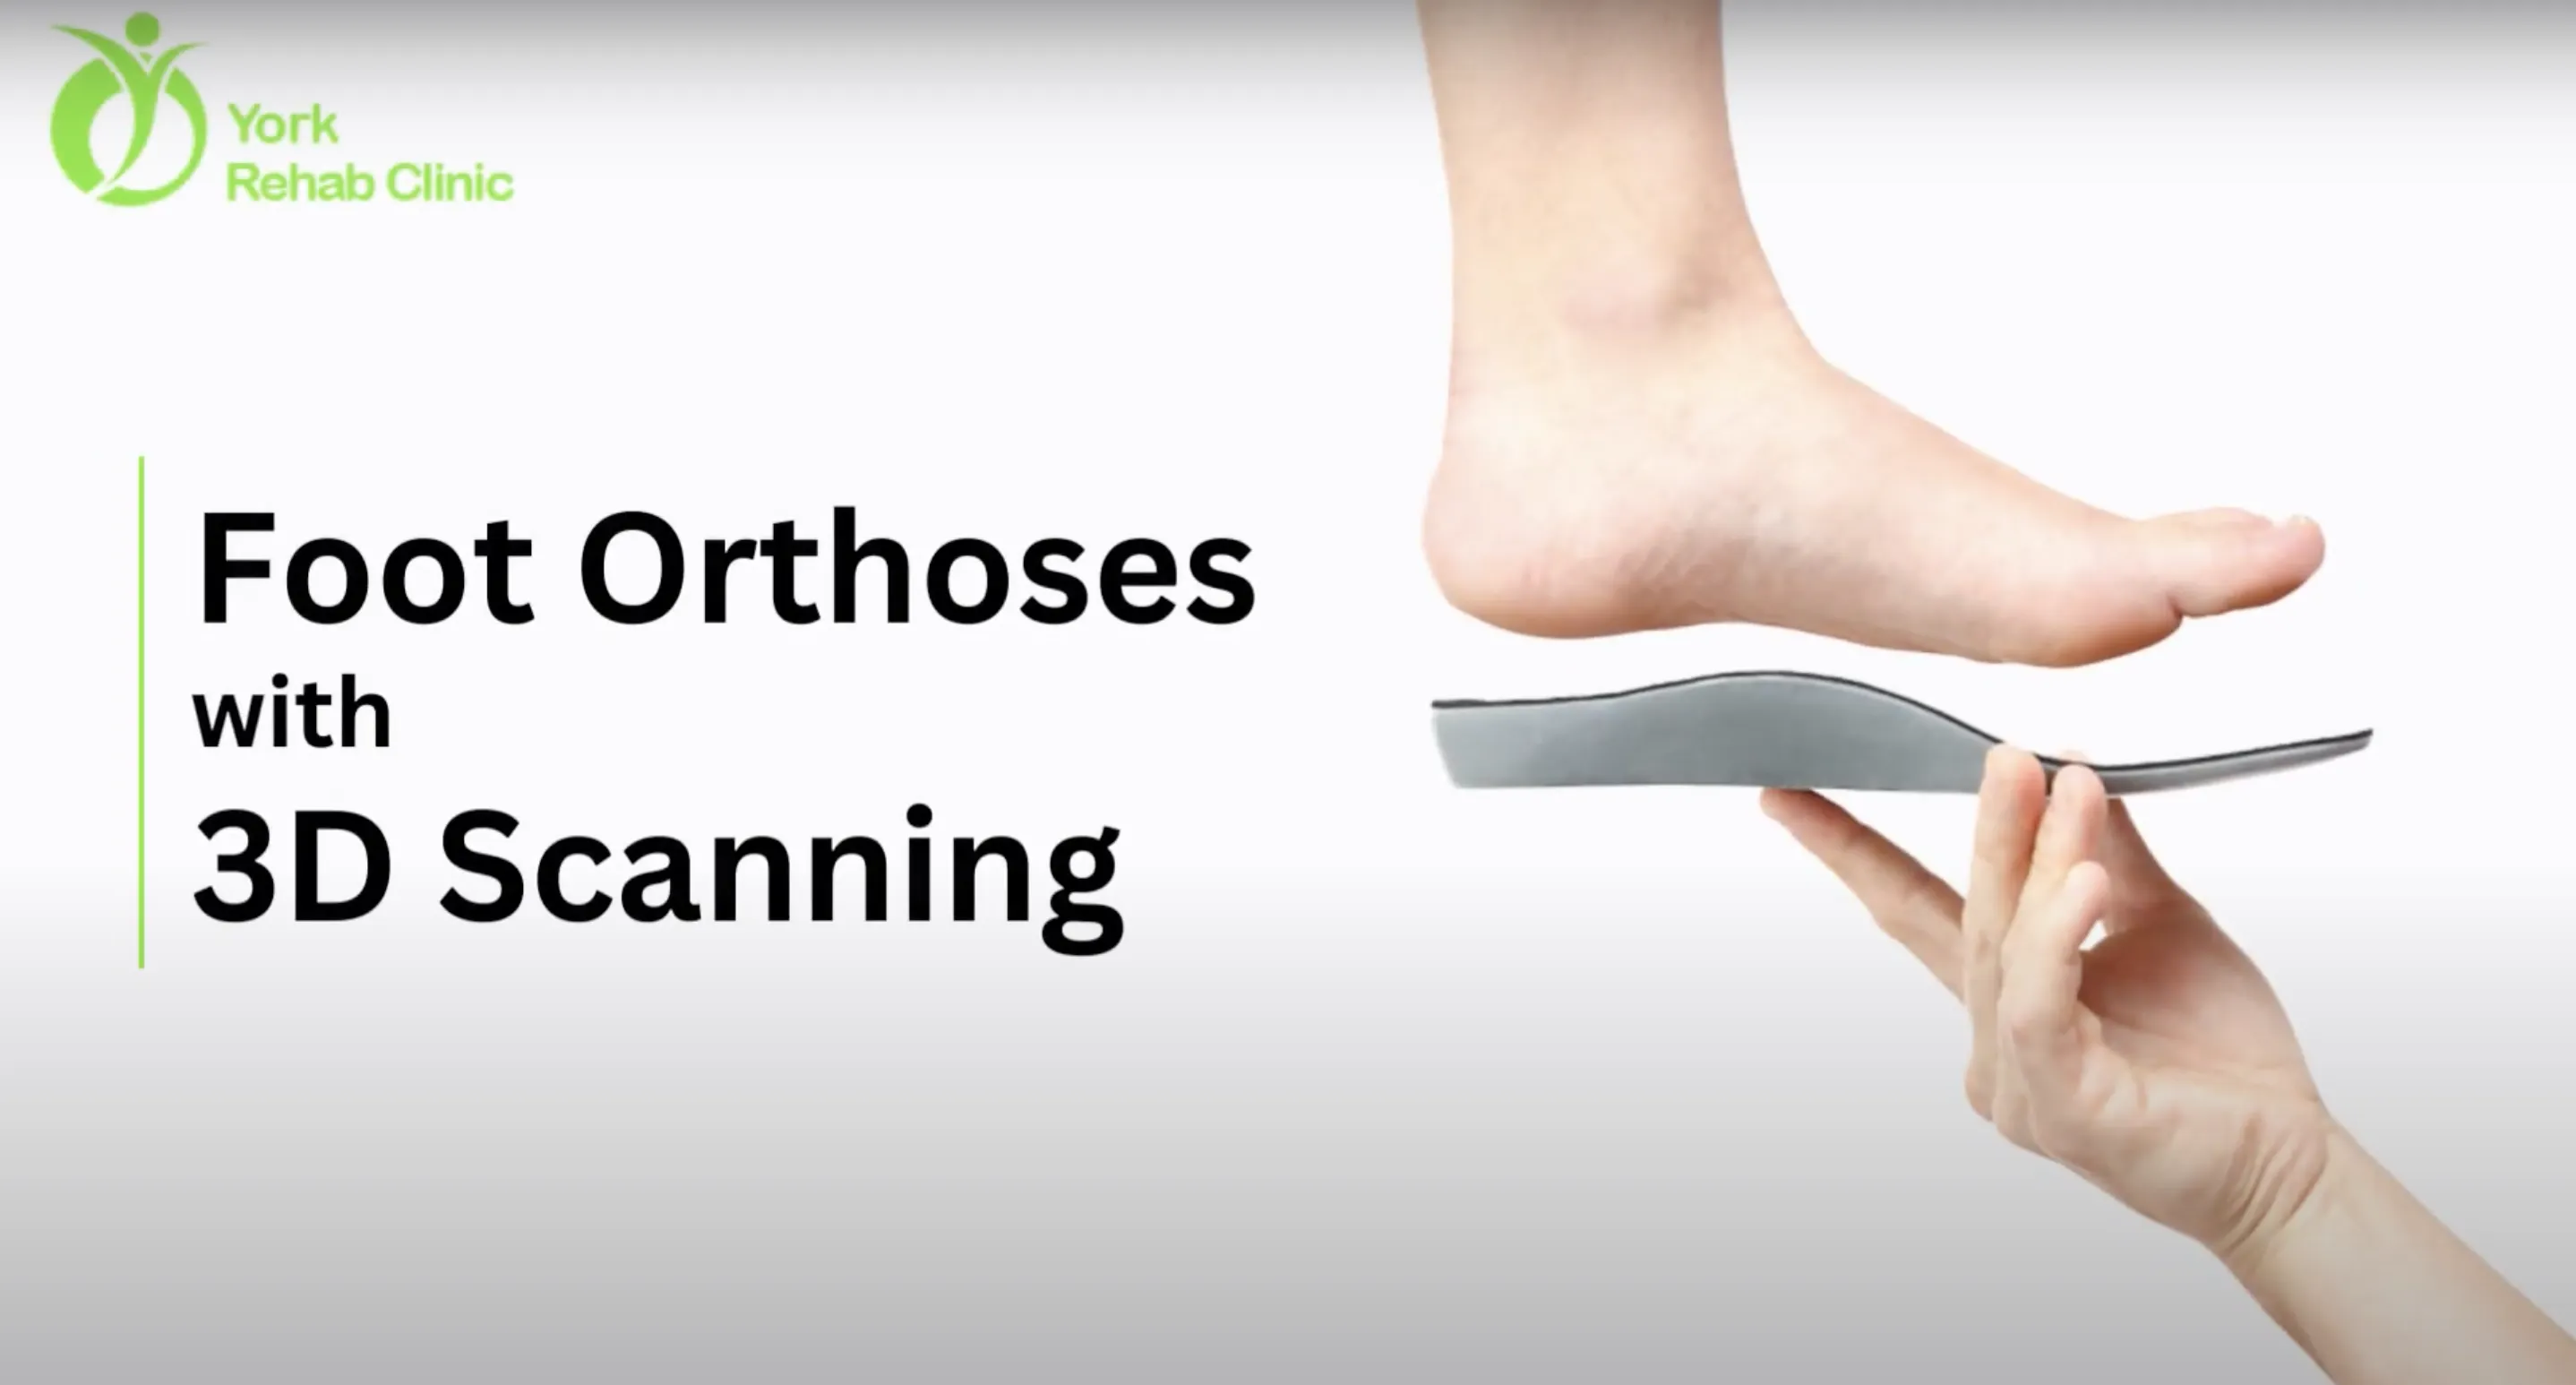 Say Goodbye to Foot Pain: York Rehab Clinic’s 3D Scanning Technology Delivers Perfect-Fit Orthoses